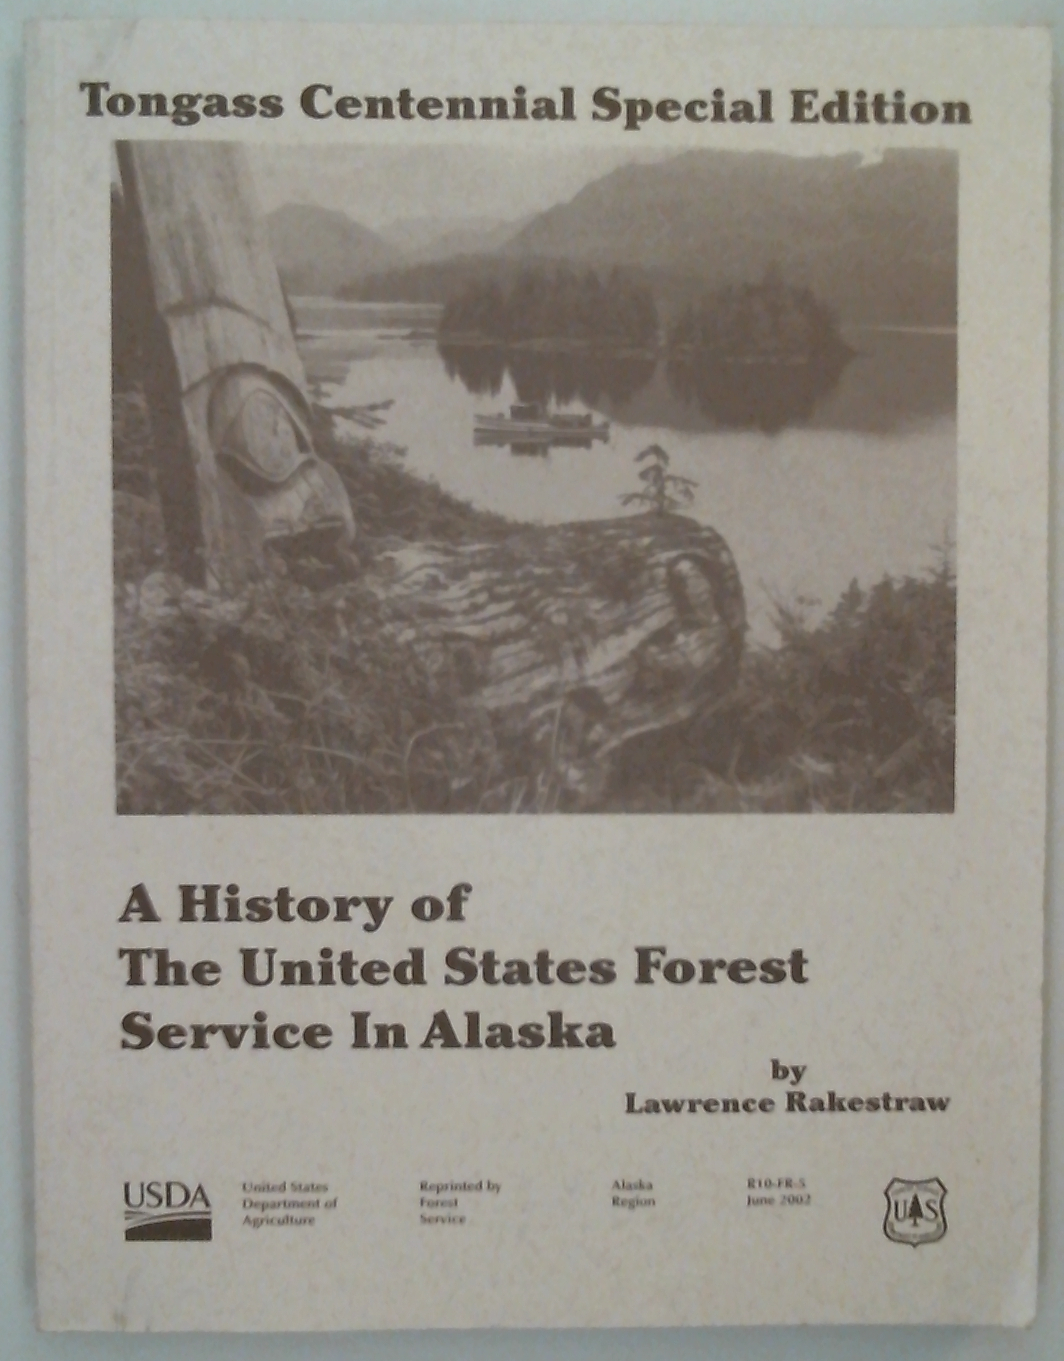 A History of The United States Forest Service in Alaska